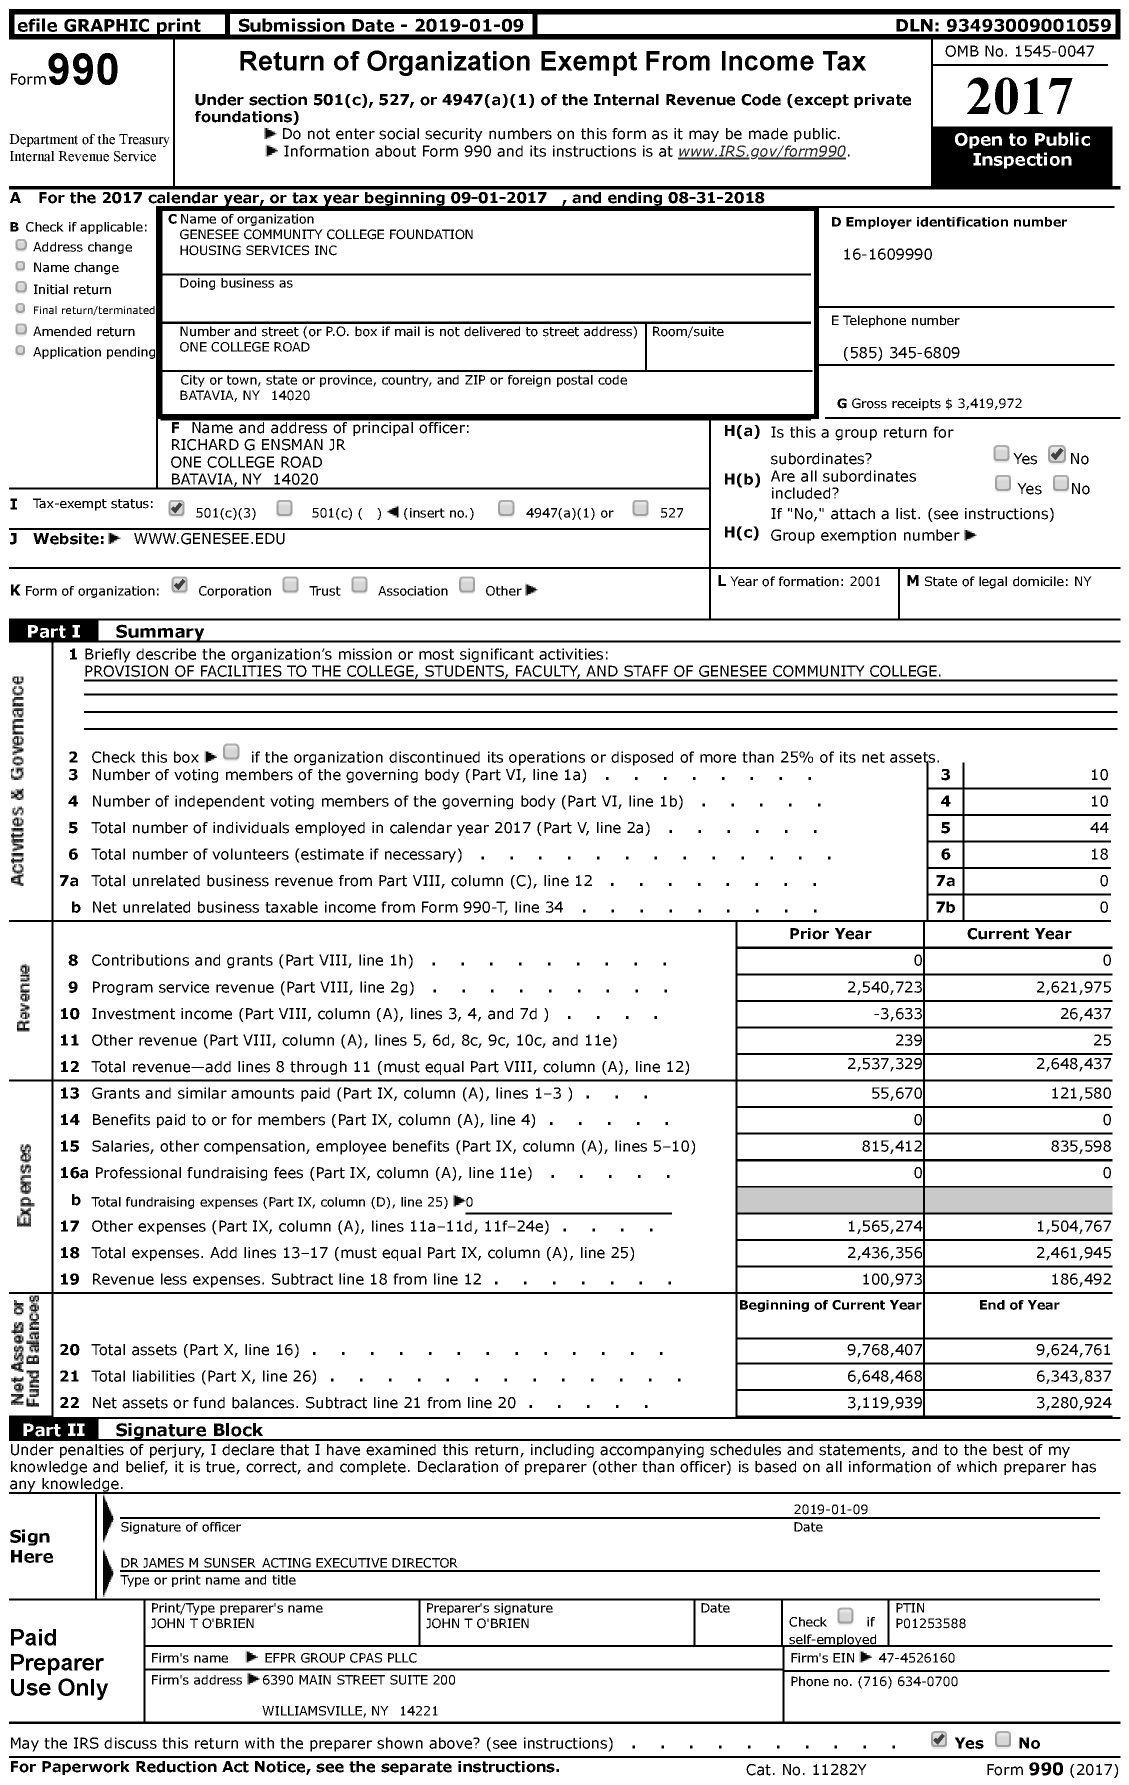 Image of first page of 2017 Form 990 for Genesee Community College Foundation Housing Services